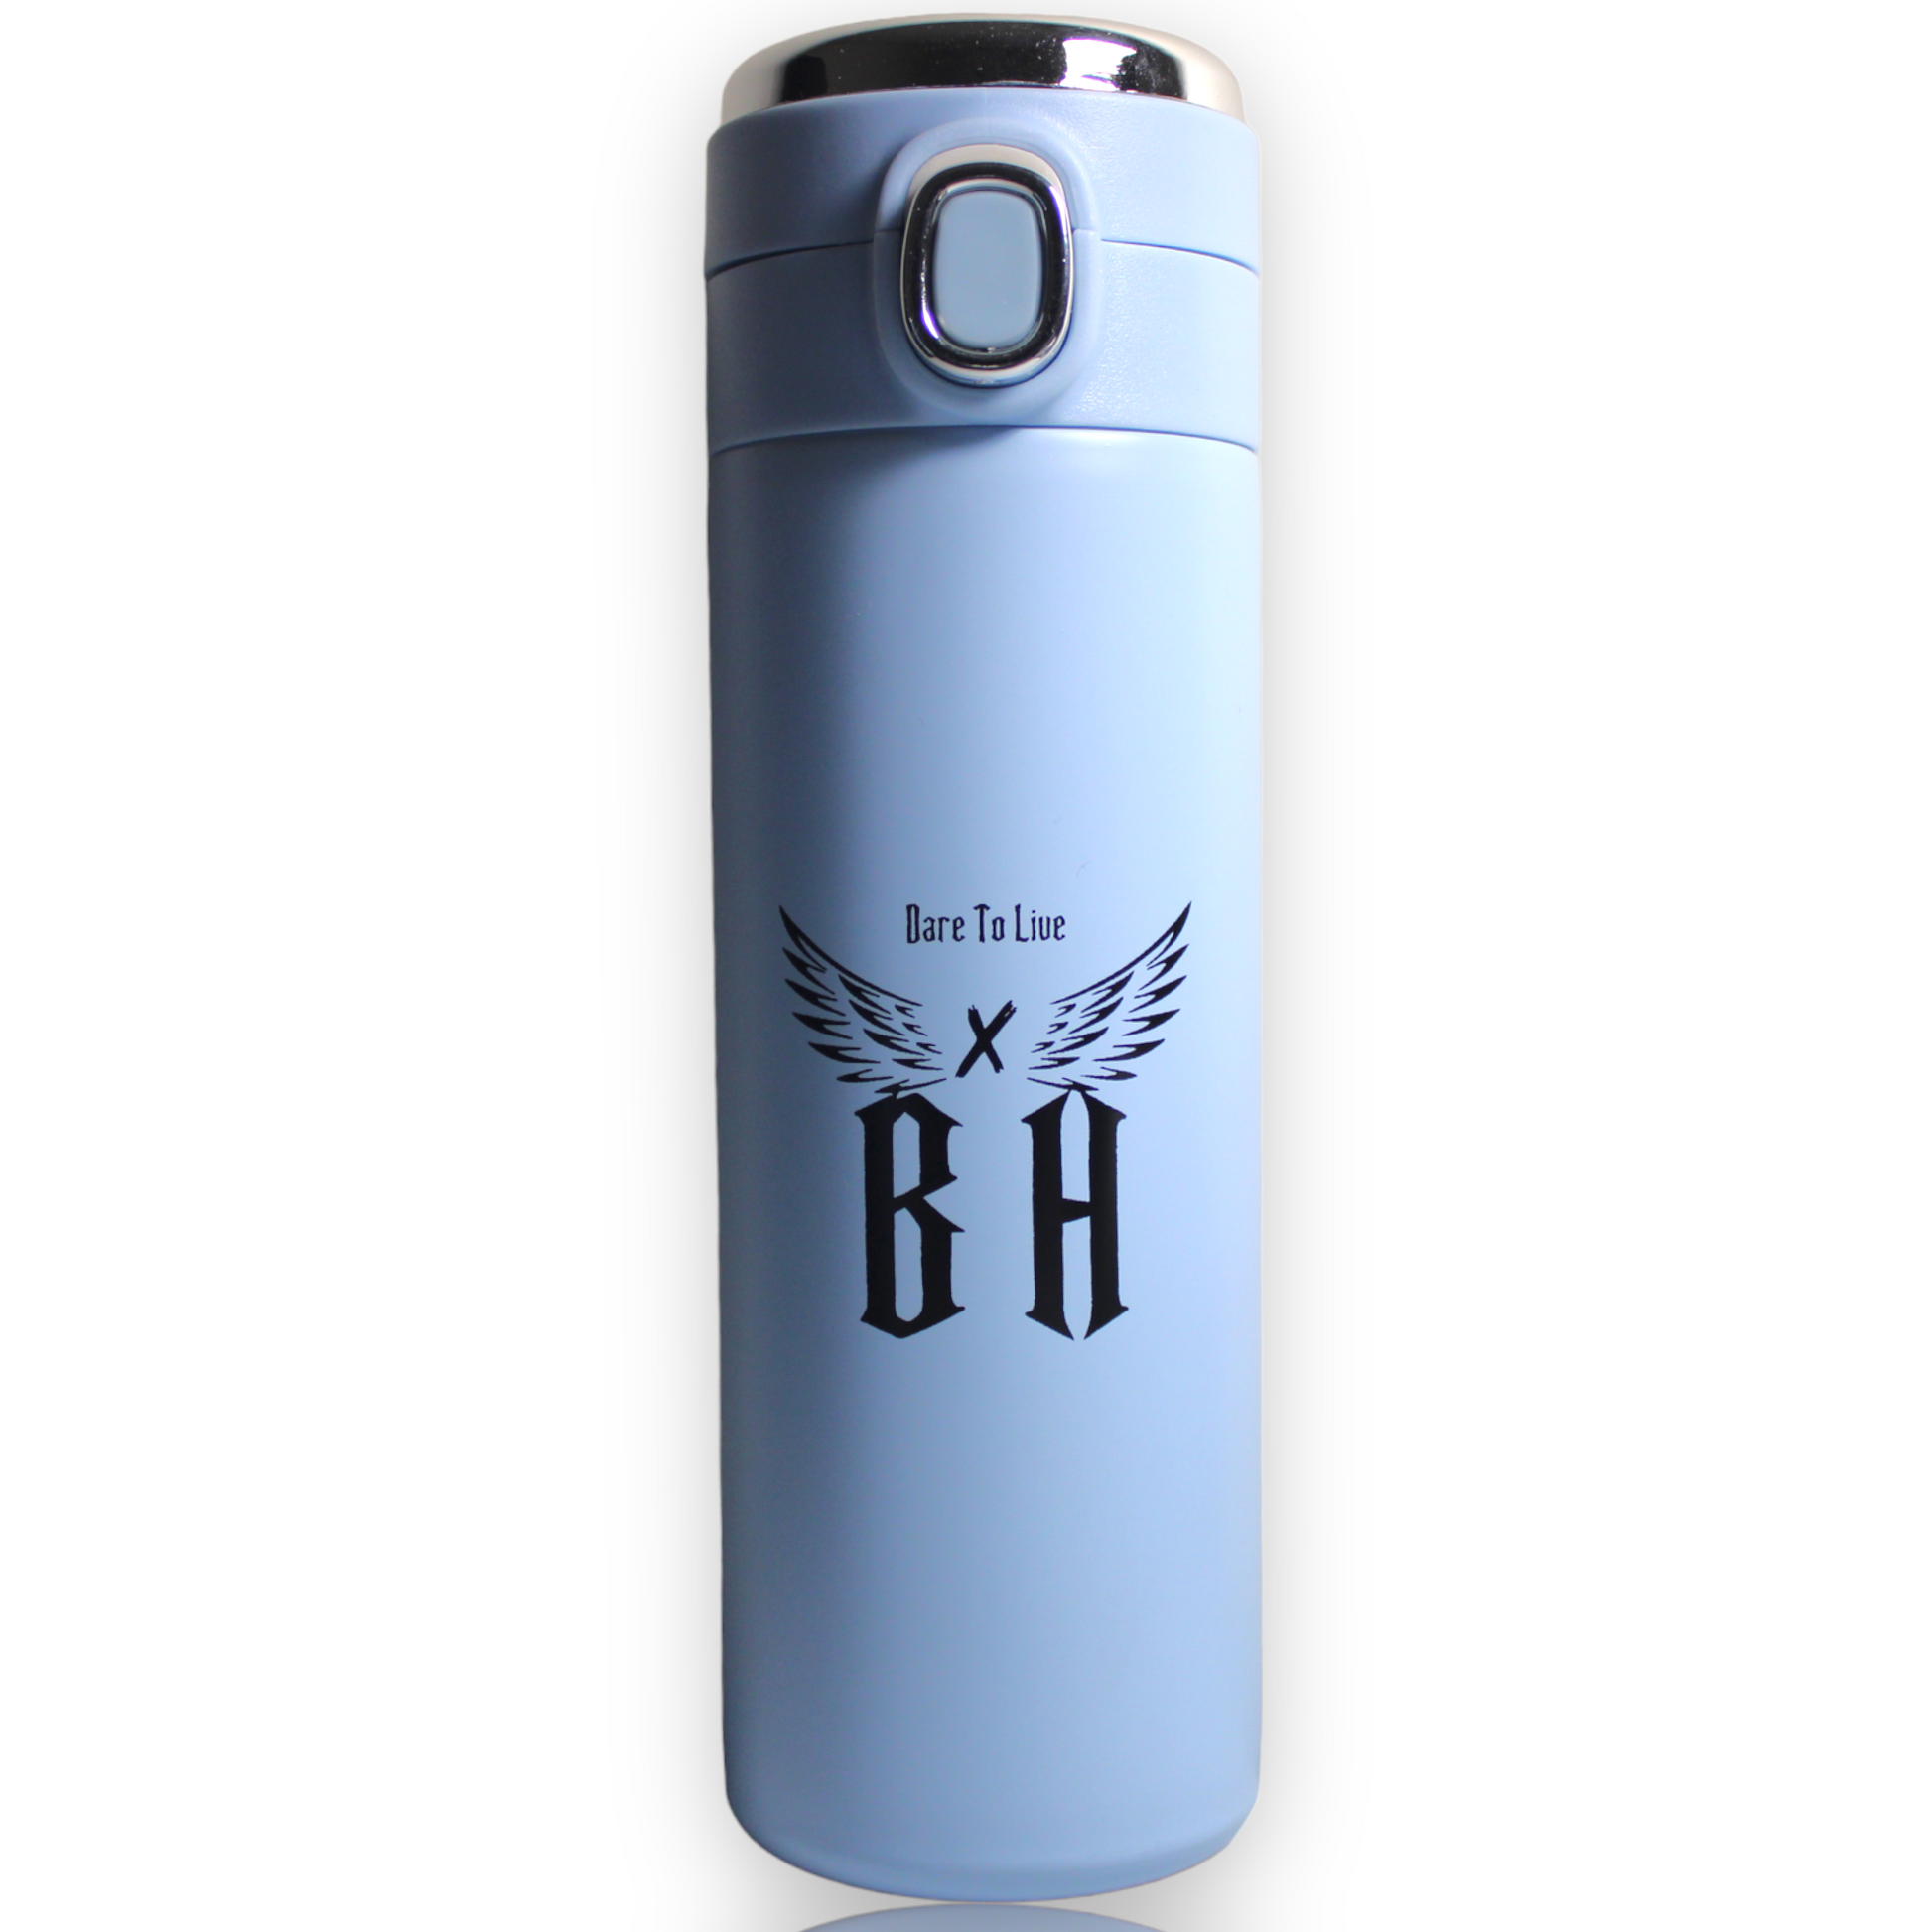 Vacuum Flask LED Temperature Display with Double Wall Insulated Water Bottle.